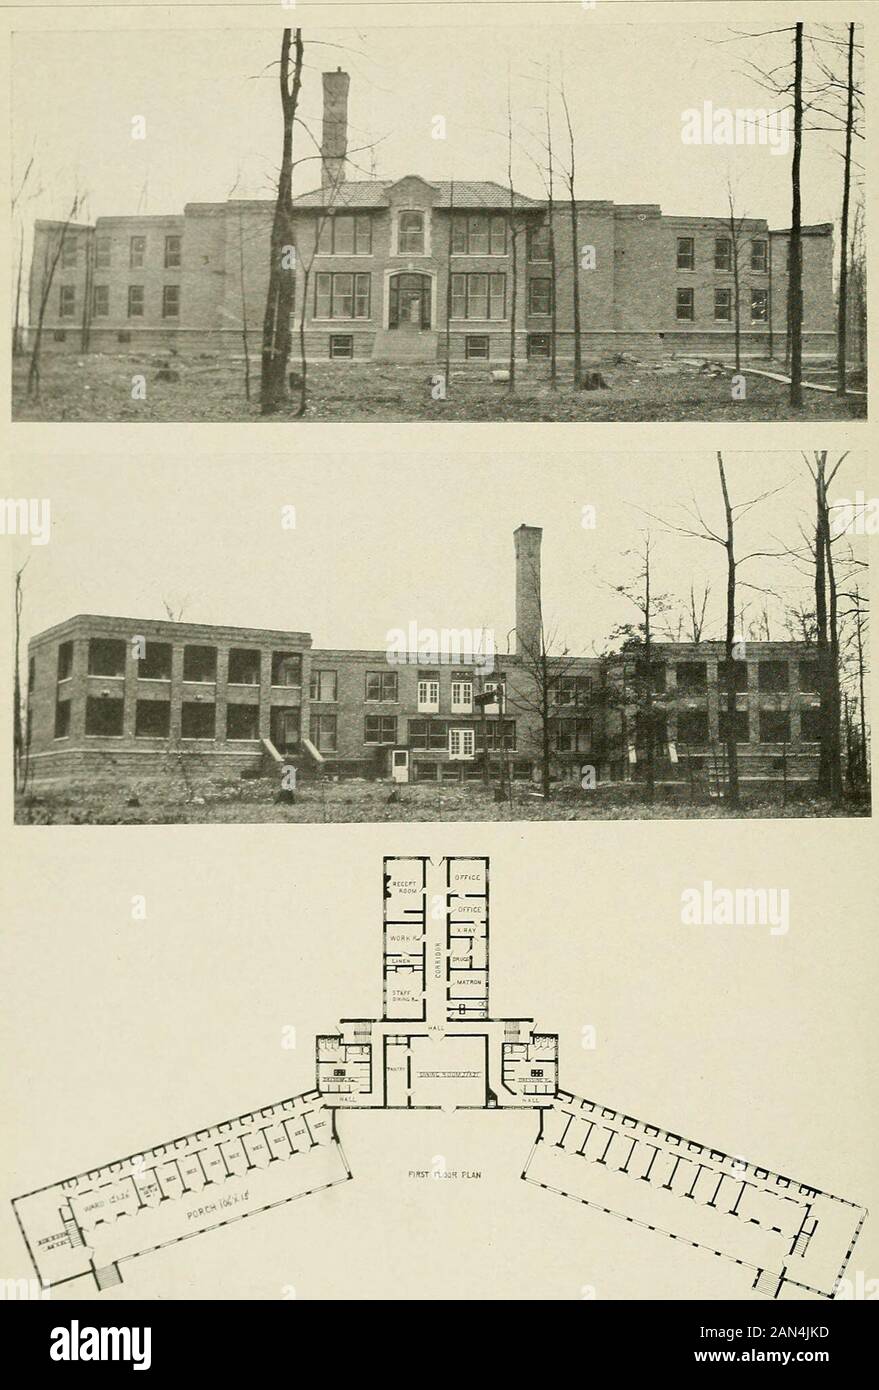 Tuberculosis hospital and sanatorium construction; . ernally with shingles, and should make an artisticand attractive structure. The building consists of a central section 25 feet wide by 80feet deep, having a basement and two stories, with wings or porches extending fromthe sides 86 feet long by 24 feet wide. The basement contains rooms for the heating plant, storage of coal and supplies.The first floor consists of a sitting room 25 feet wide by 30 feet deep, a dining room 25 feetwide by 16 feet deep, a kitchen 16 feet wide by 22 feet deep, a pantry 8 feet wide by 12feet deep, store-rooms, an Stock Photo